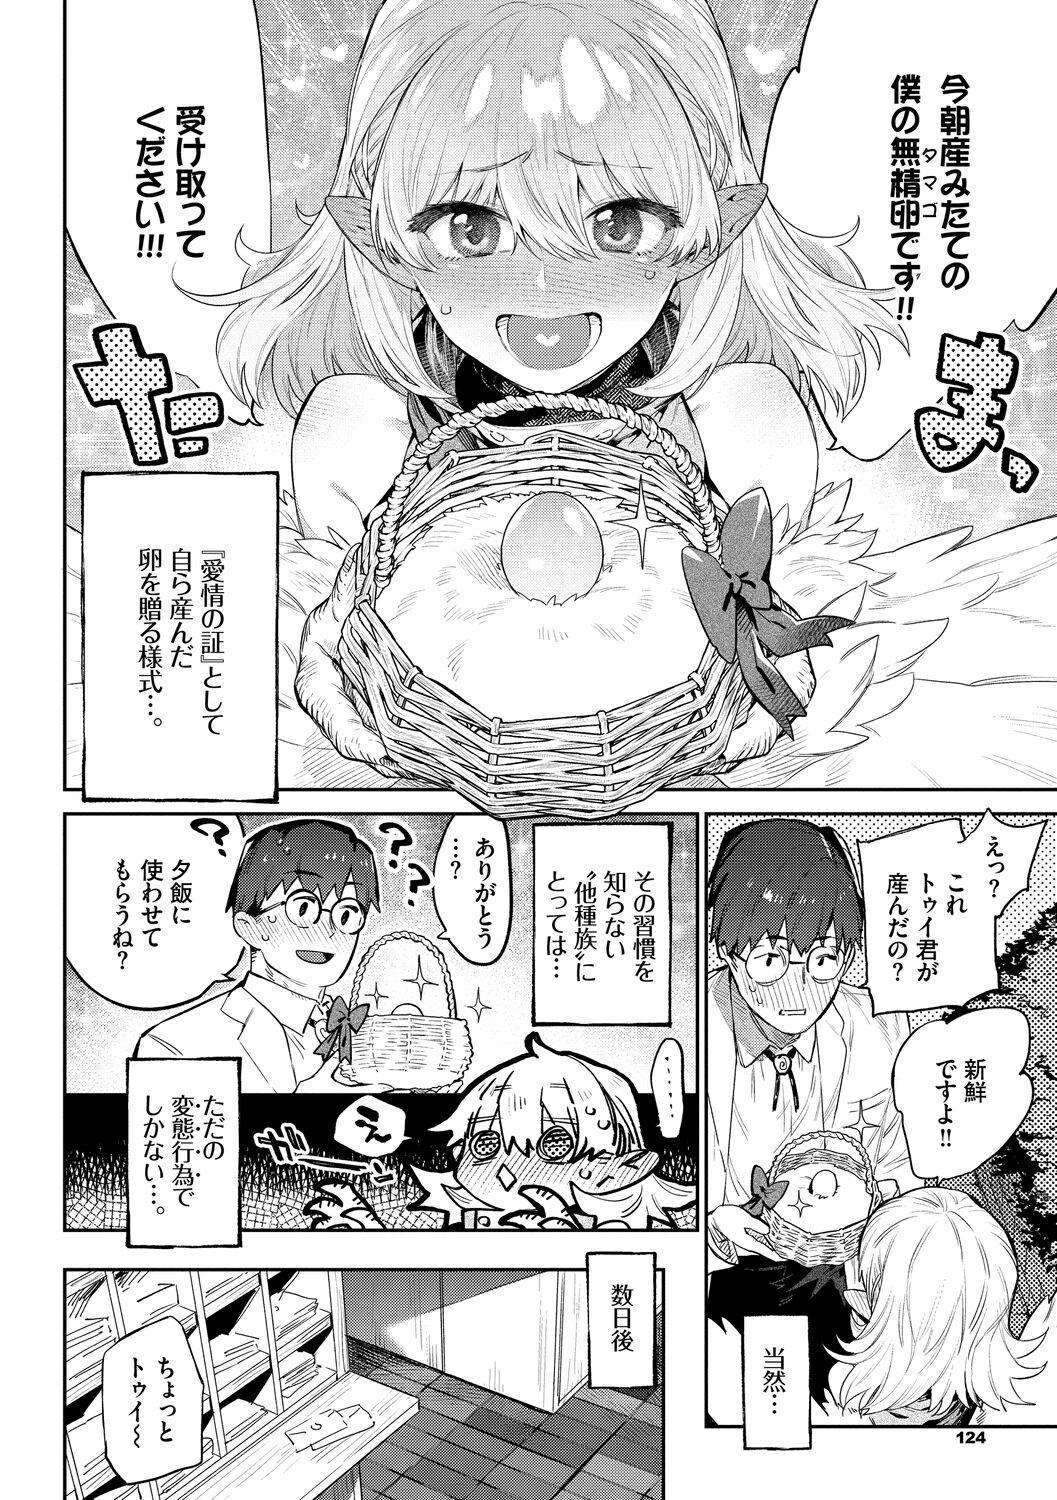 Ihou no Otome - Monster Girls in Another World 123